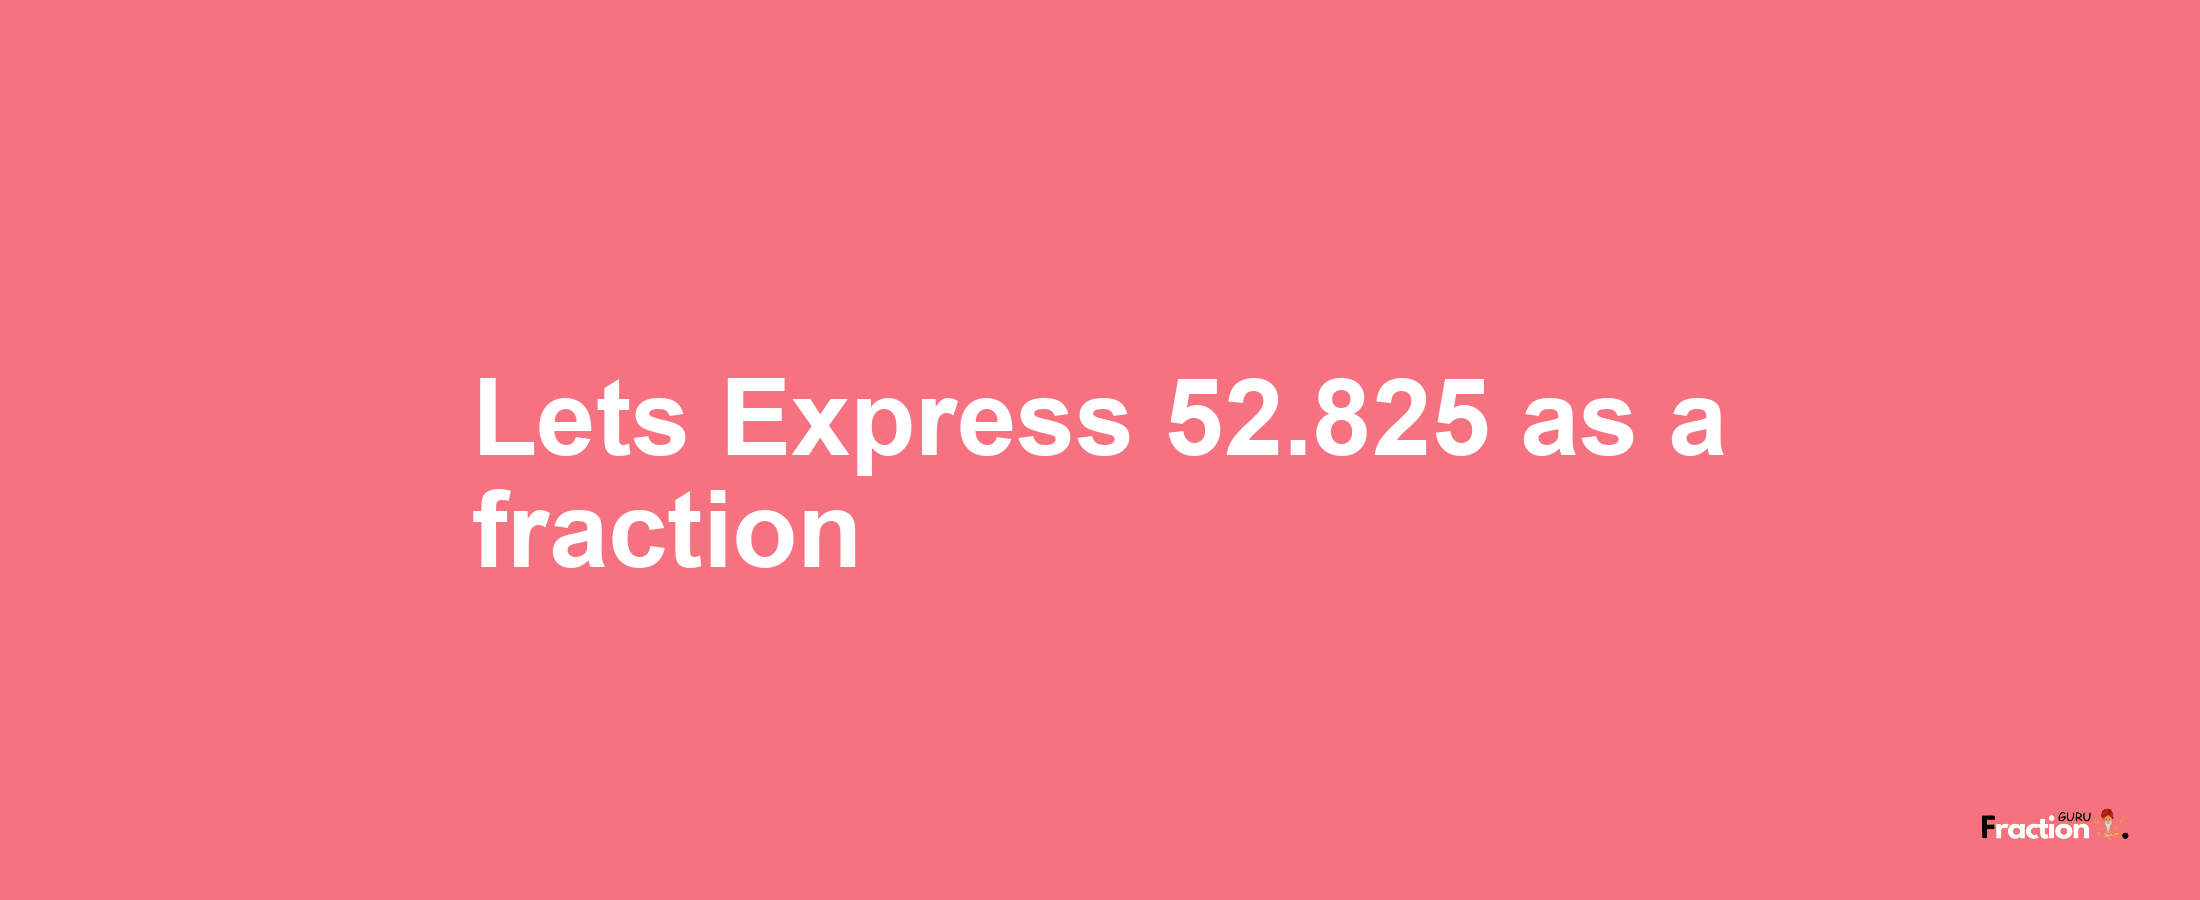 Lets Express 52.825 as afraction